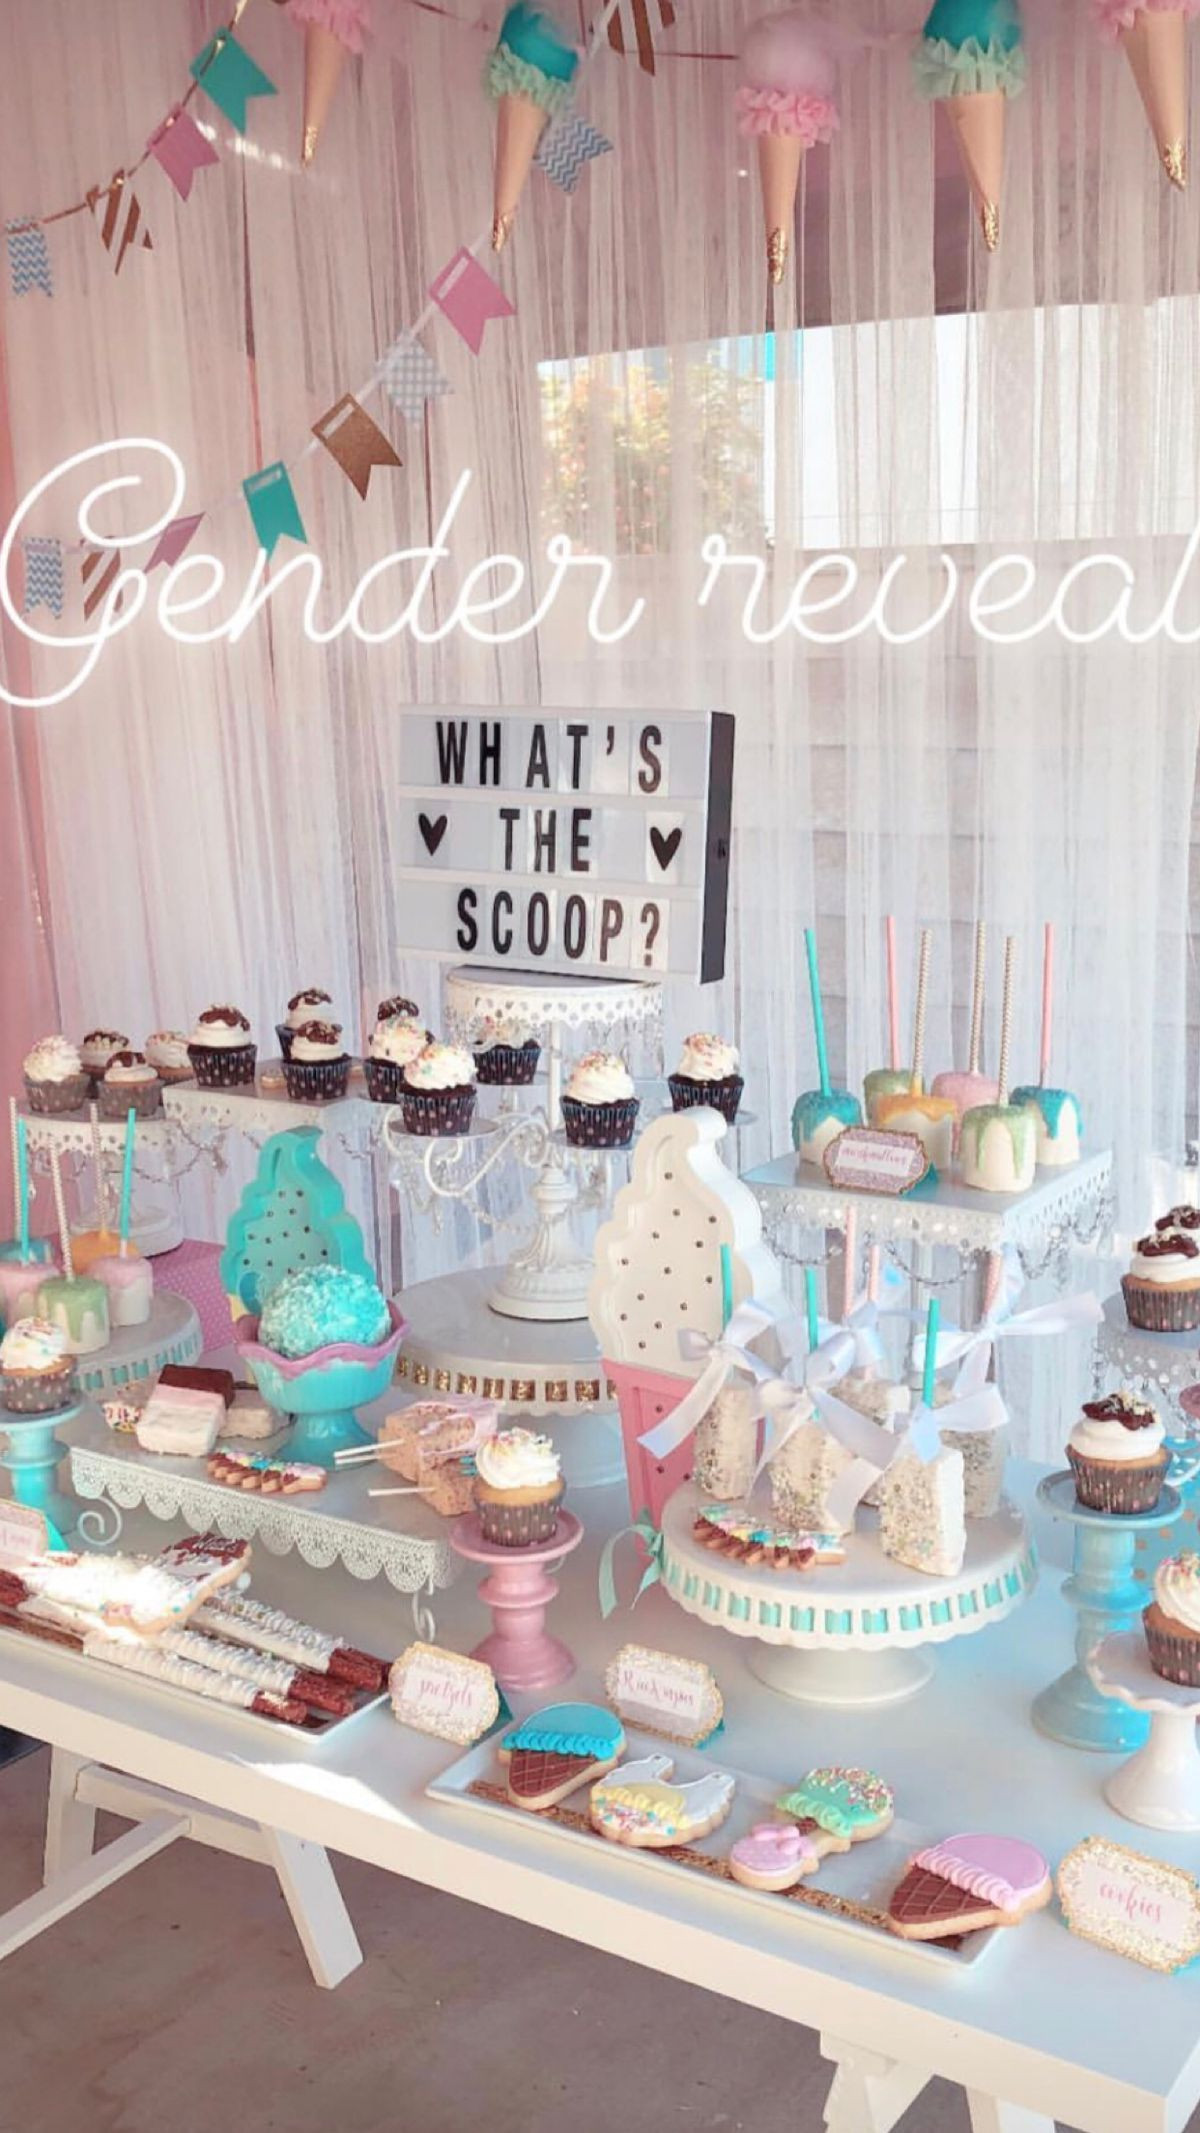 Cool Gender Reveal Party Ideas
 Pin by Alexis Johnson on Reveal gender party